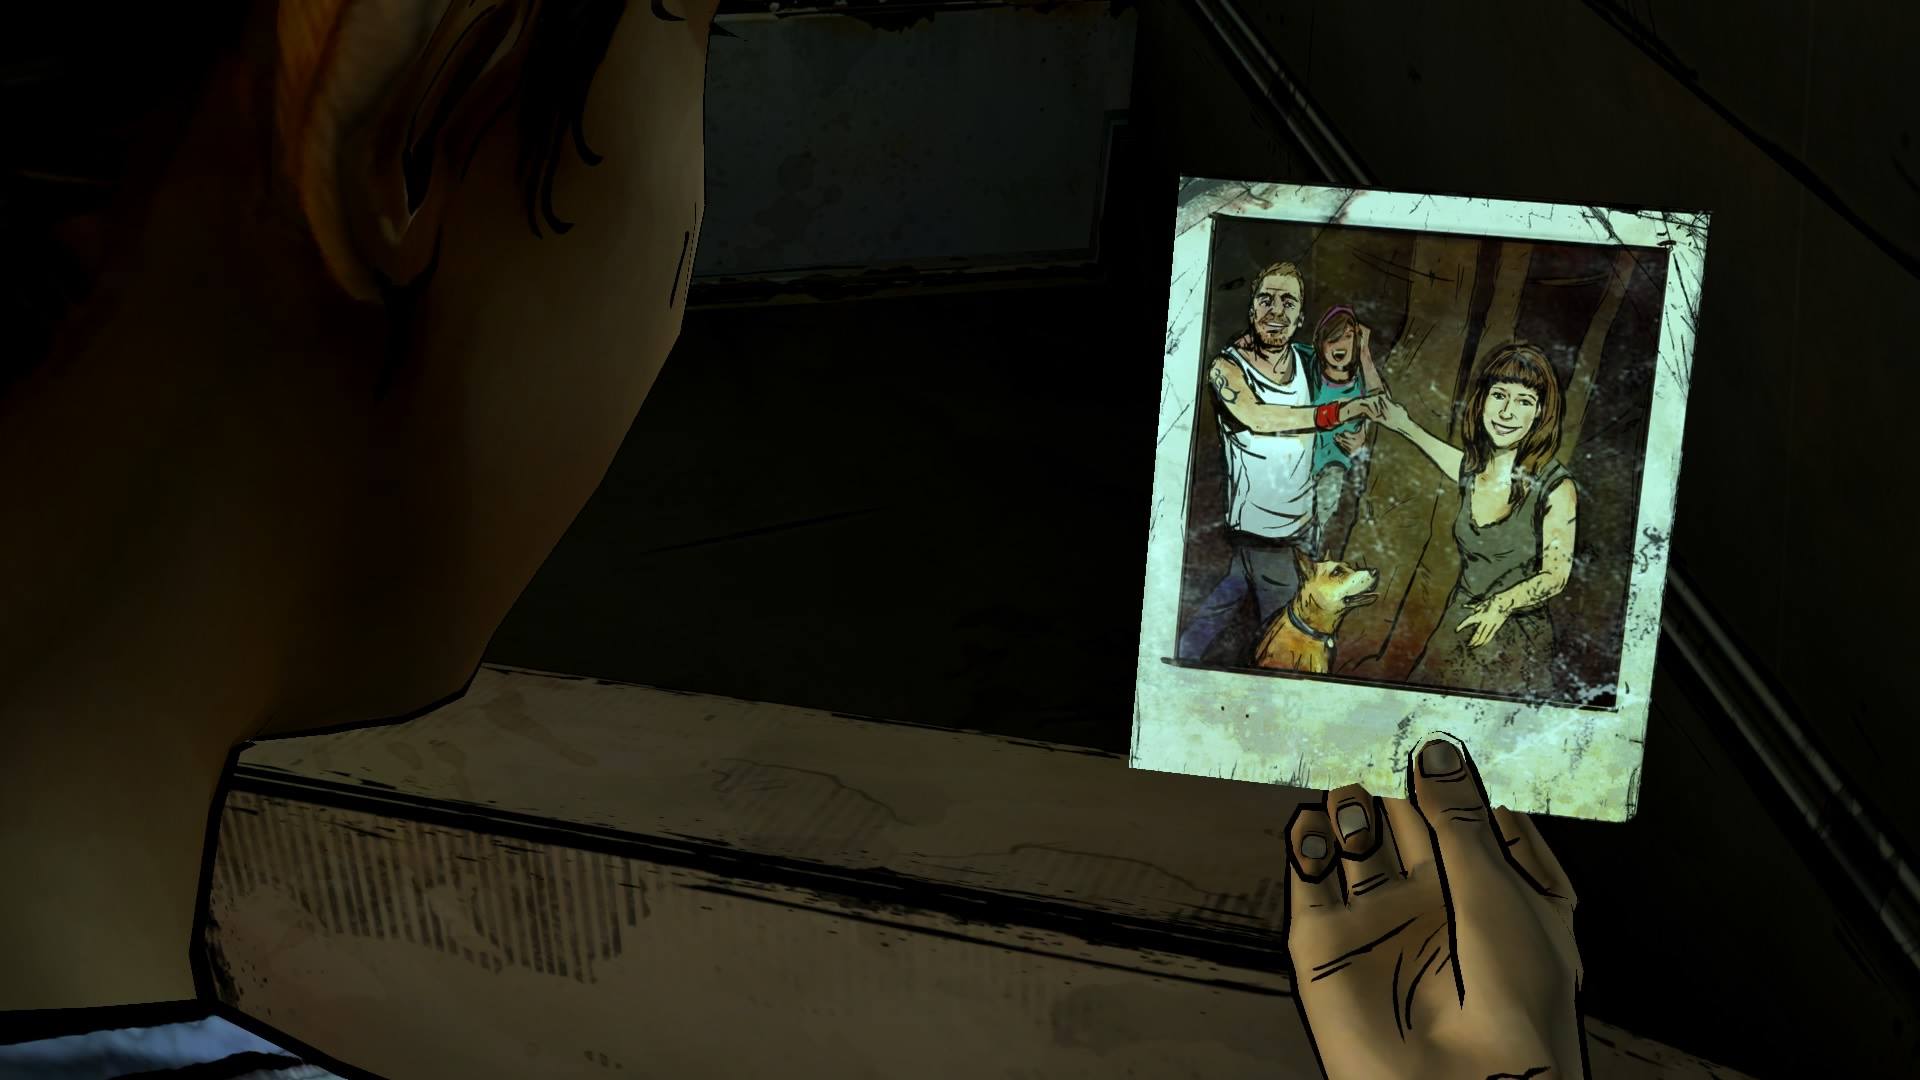 Clementine examines a photo of a family